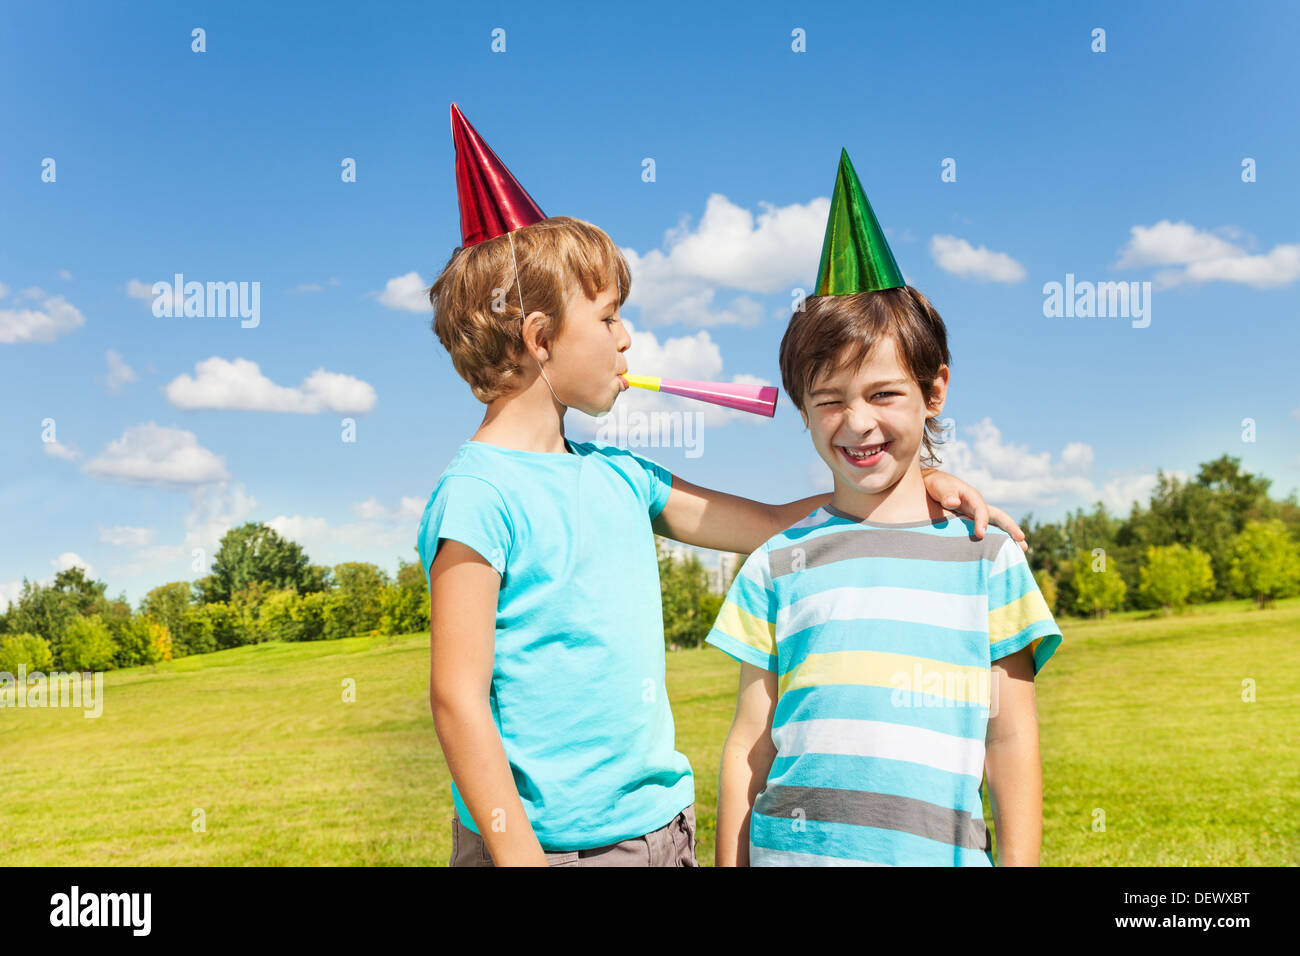 Two boys on birthday party having fun with blowing into noisemaker loudly standing together in the park Stock Photo